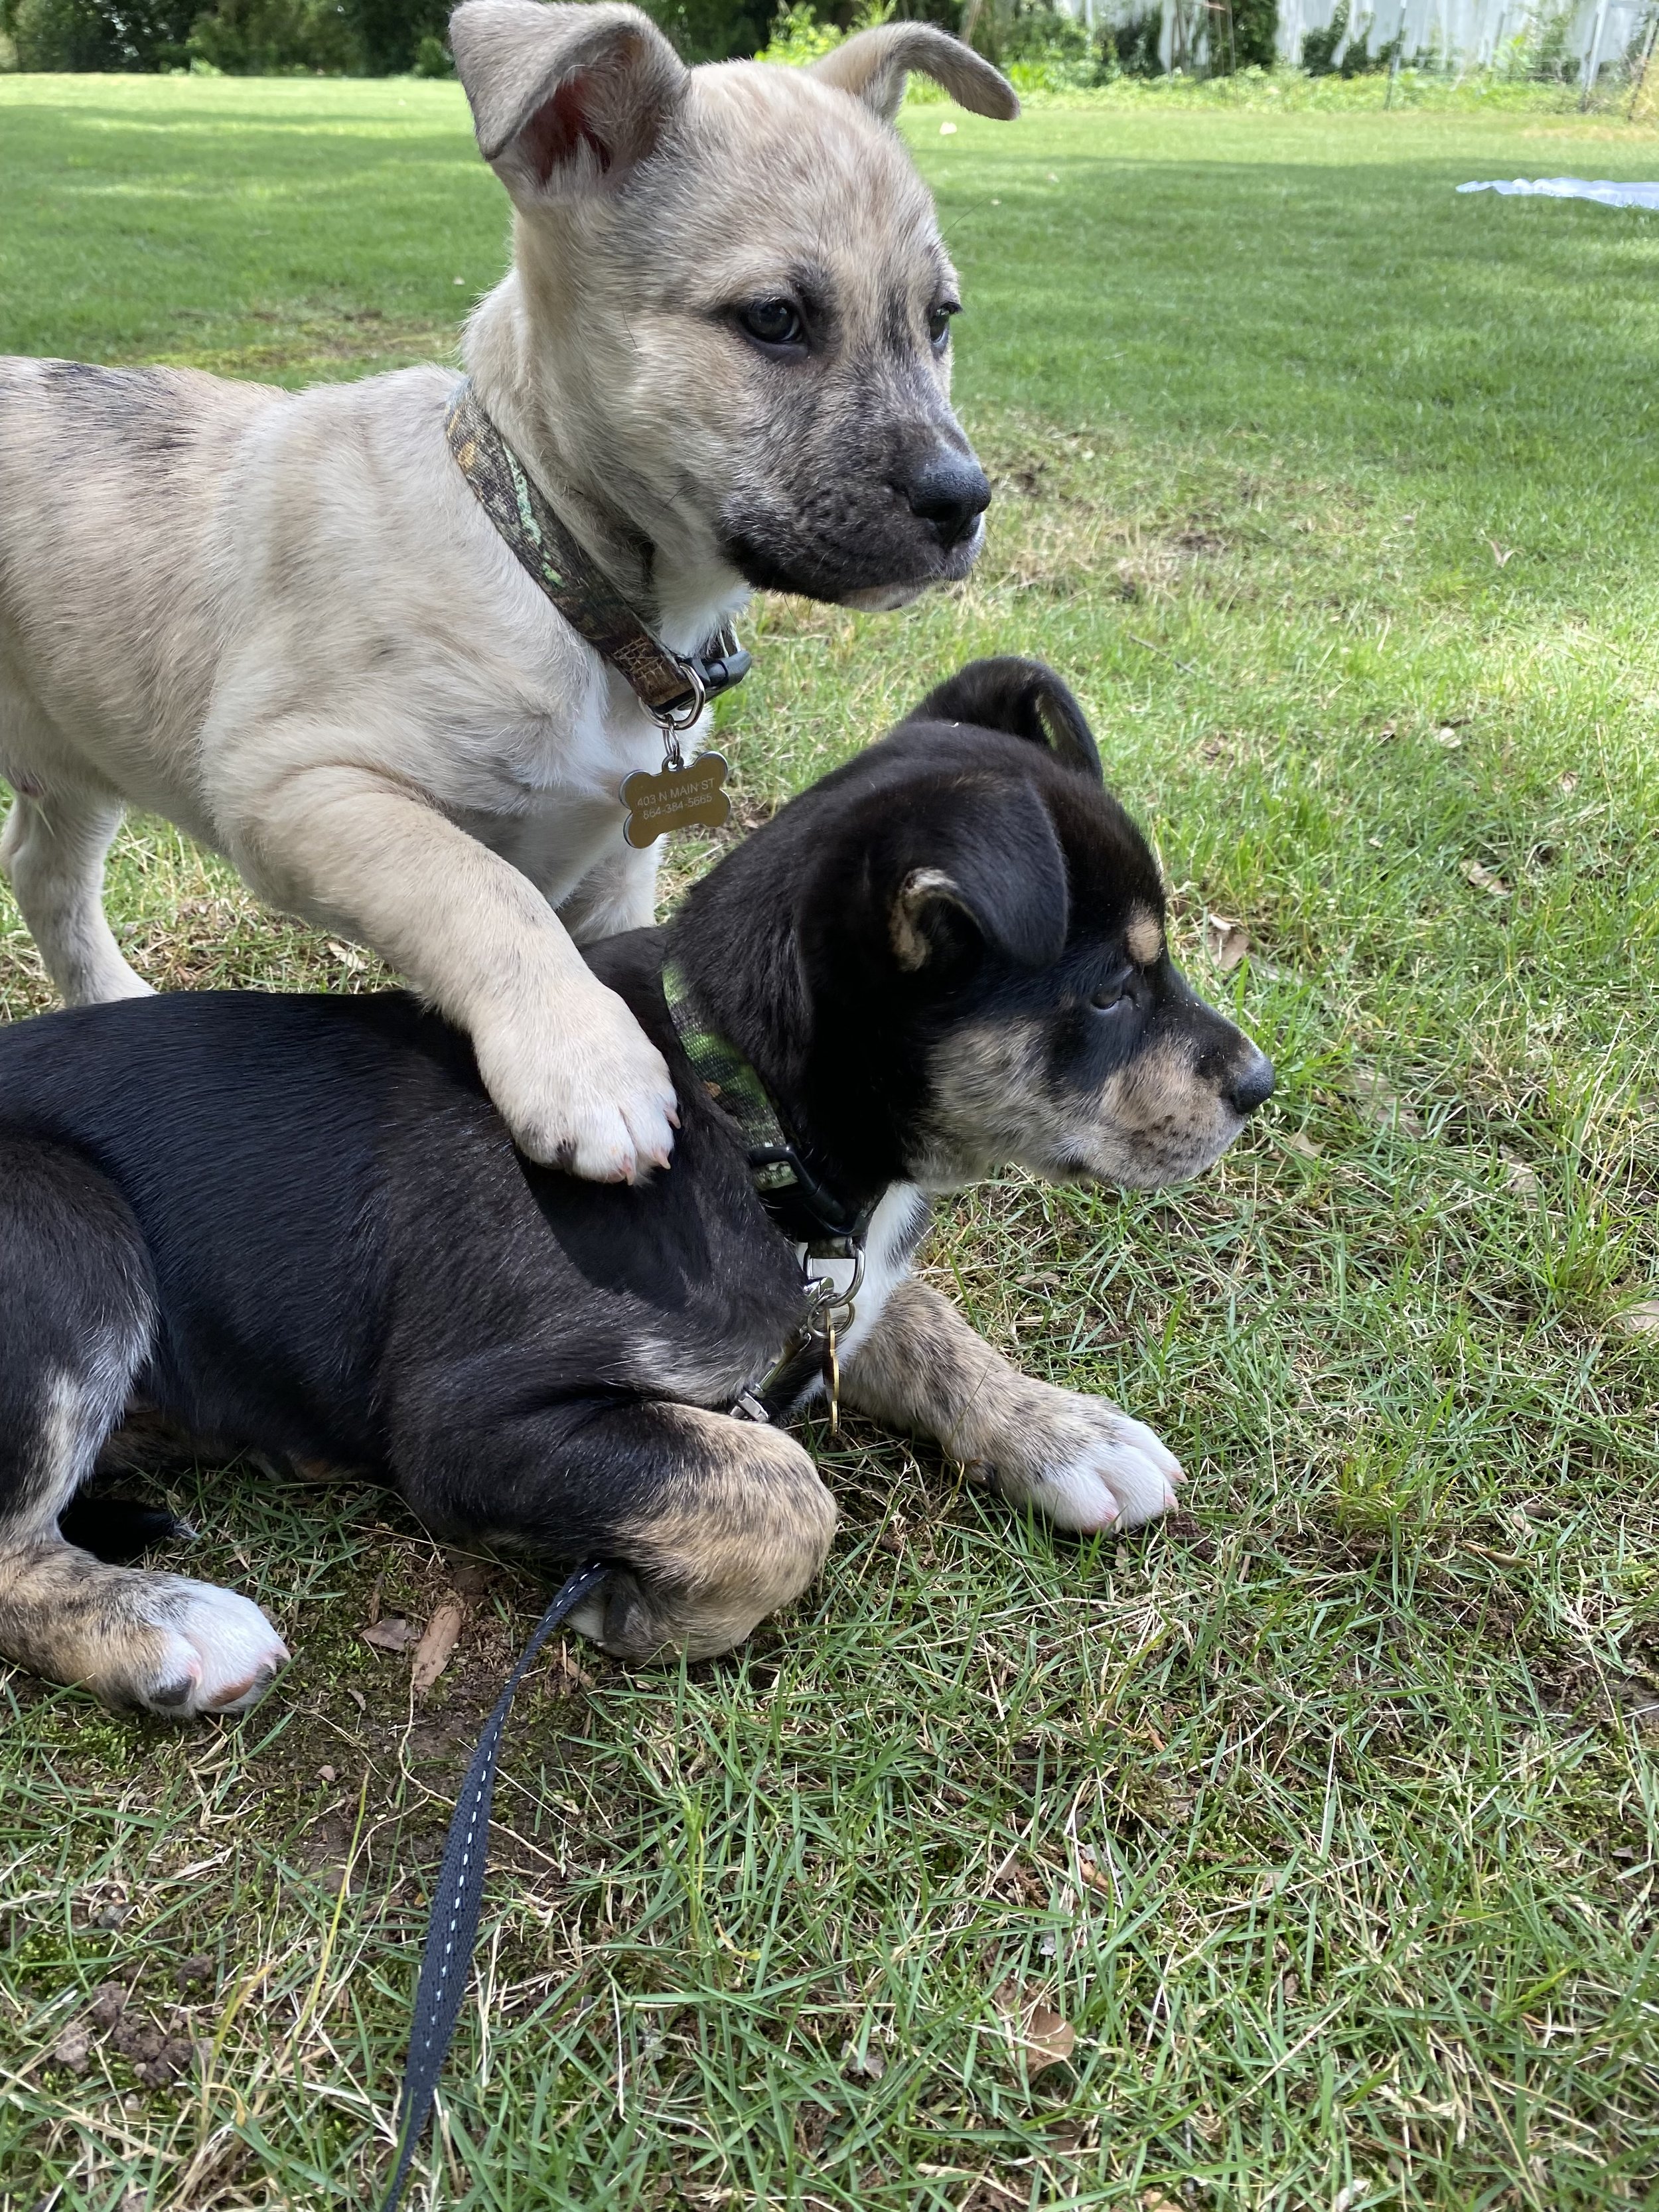 Koco and Monte, two puppies we rescued.